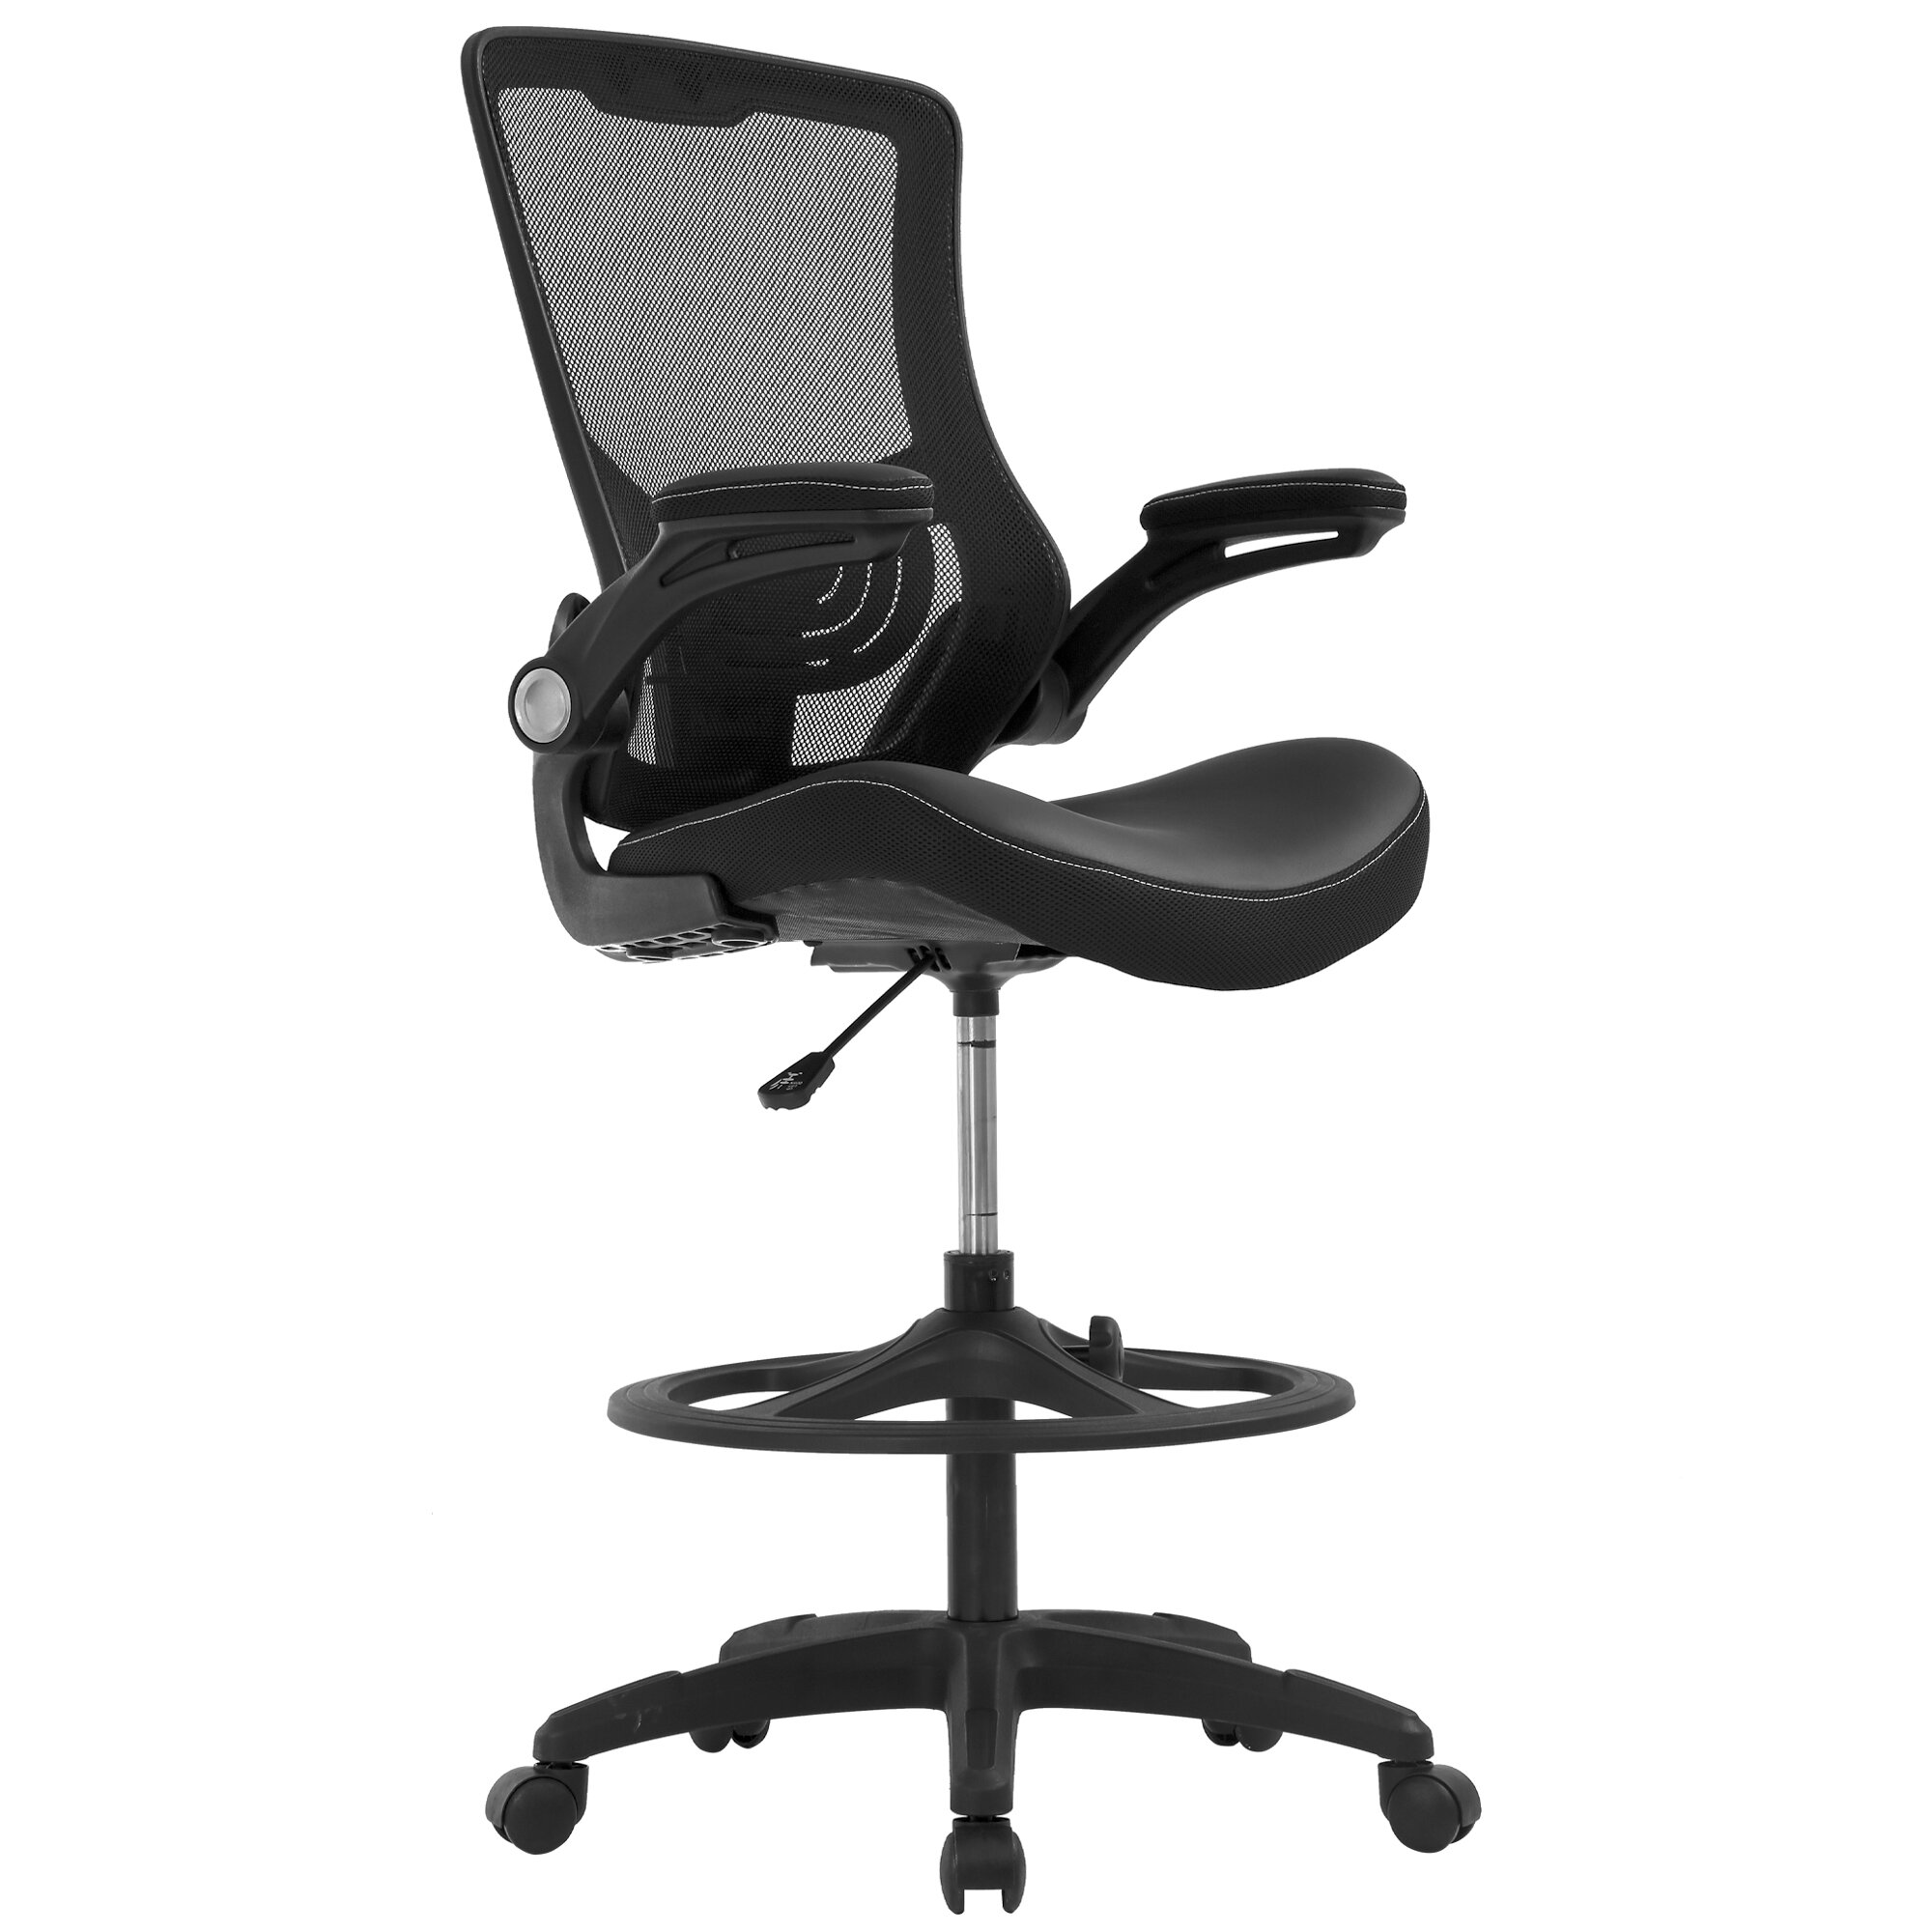 Drafting Chair for Standing Desk,Tall Office Desk Chair with Flip Up Arms Foot Rest Lumbar Support,Adjustable Height Ergonomic Mid-Back Mesh Drafting Stool,Computer Executive Rolling Chair,Black 